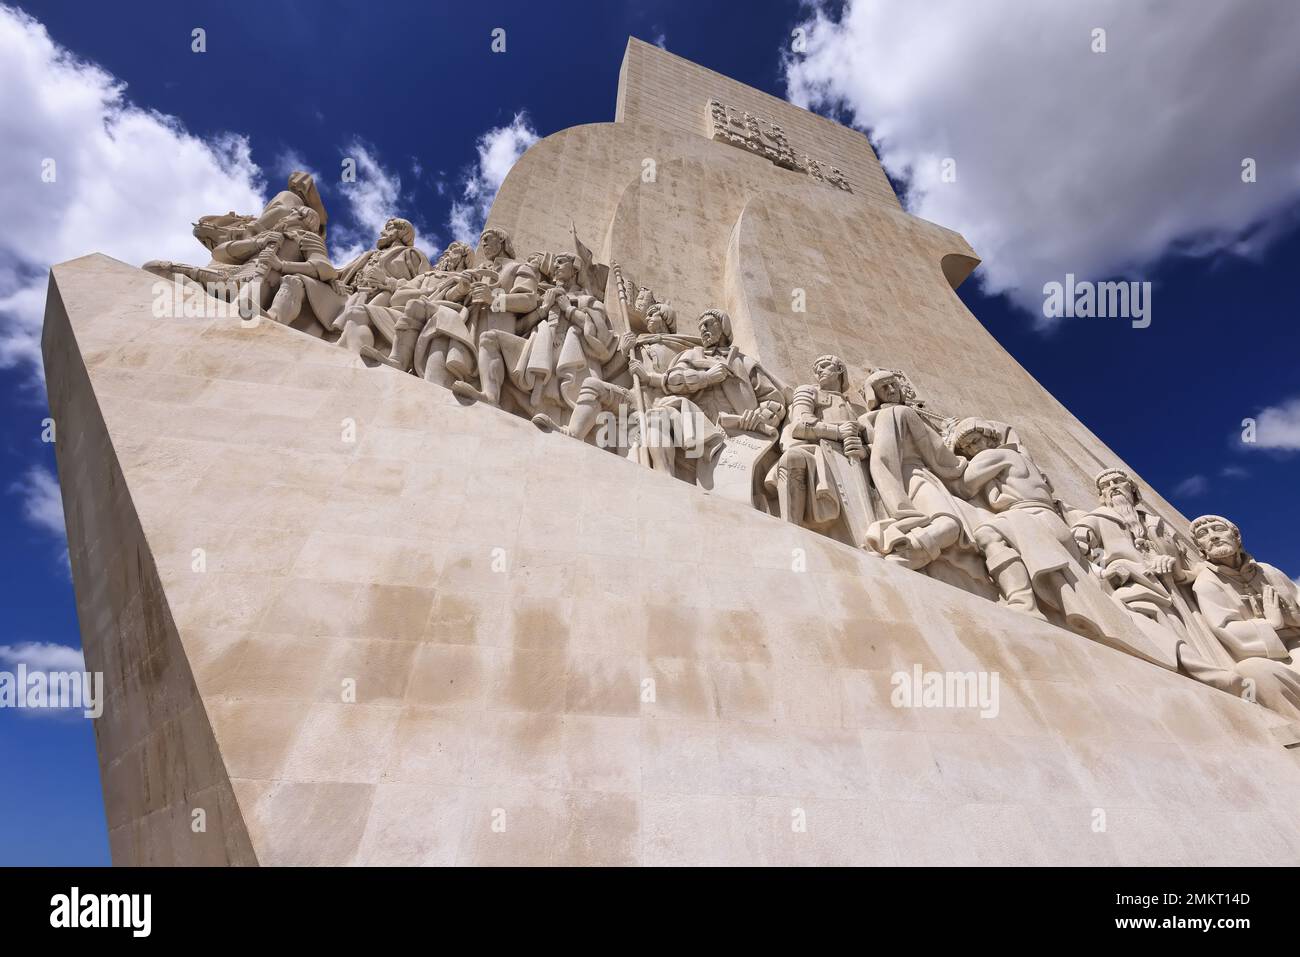 Padrão dos Descobrimentos, Monument to the Discoveries in Belém, Lisbon, Portugal. The landmark in Belém is located along the Tagus river. Stock Photo